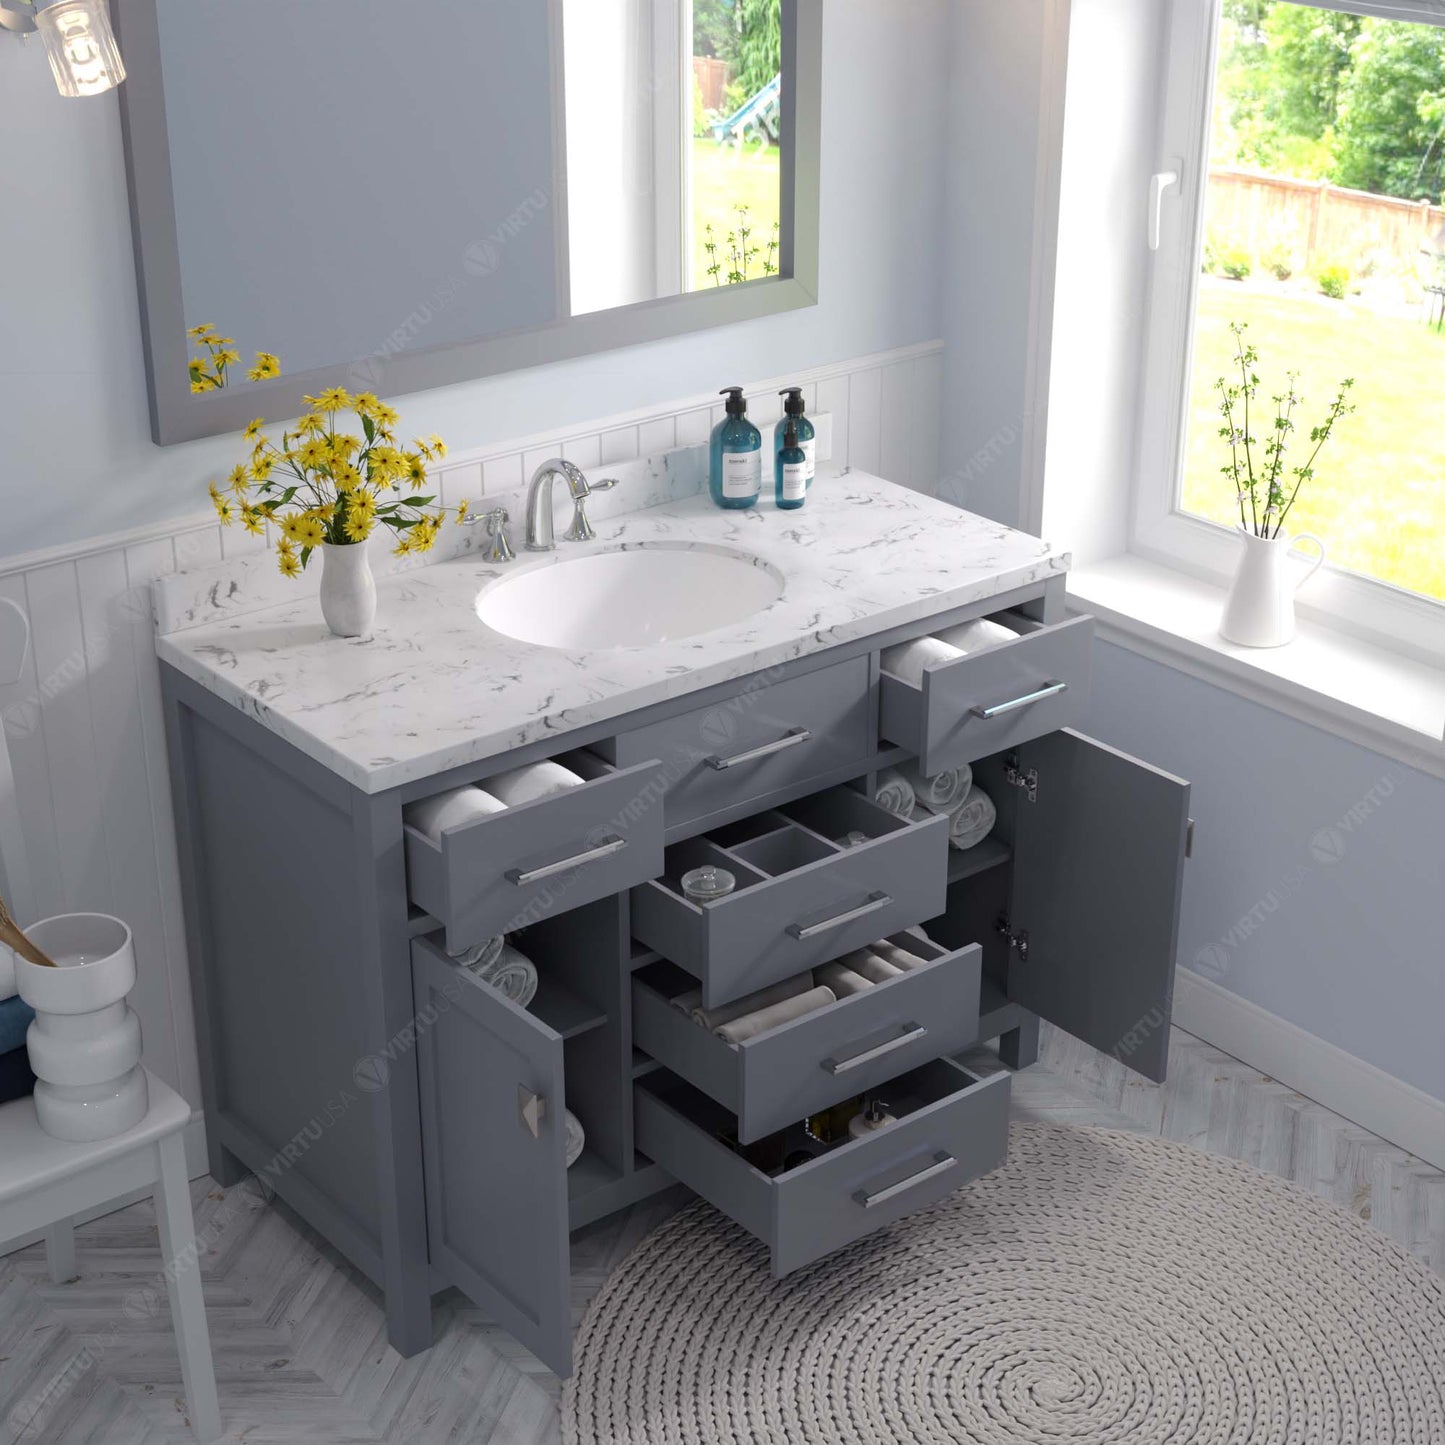 Virtu USA Caroline 48" Single Bath Vanity in Cashmere Gray with White Quartz Top and Round Sink with Brushed Nickel Faucet with Matching Mirror - Luxe Bathroom Vanities